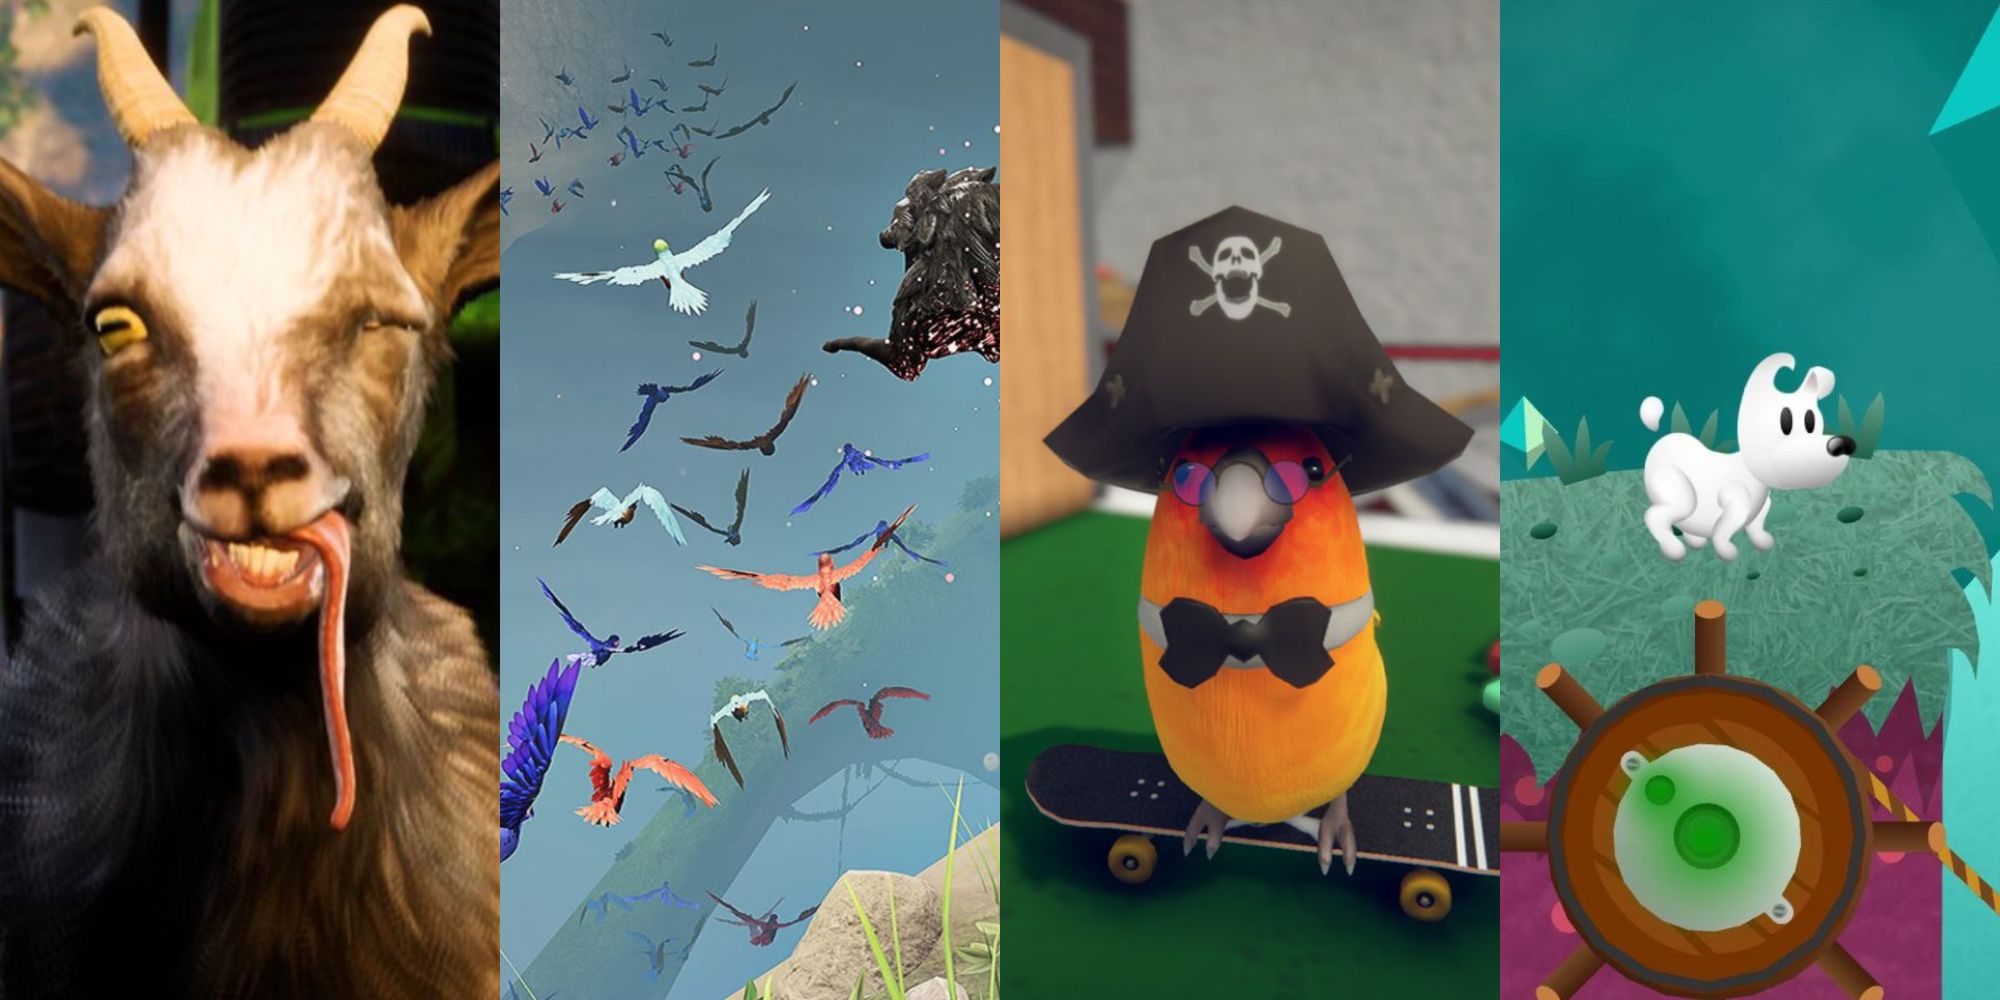 A collage showing pictures of Goat Simulator, Lost Ember, Skatebird, and Mimpi.